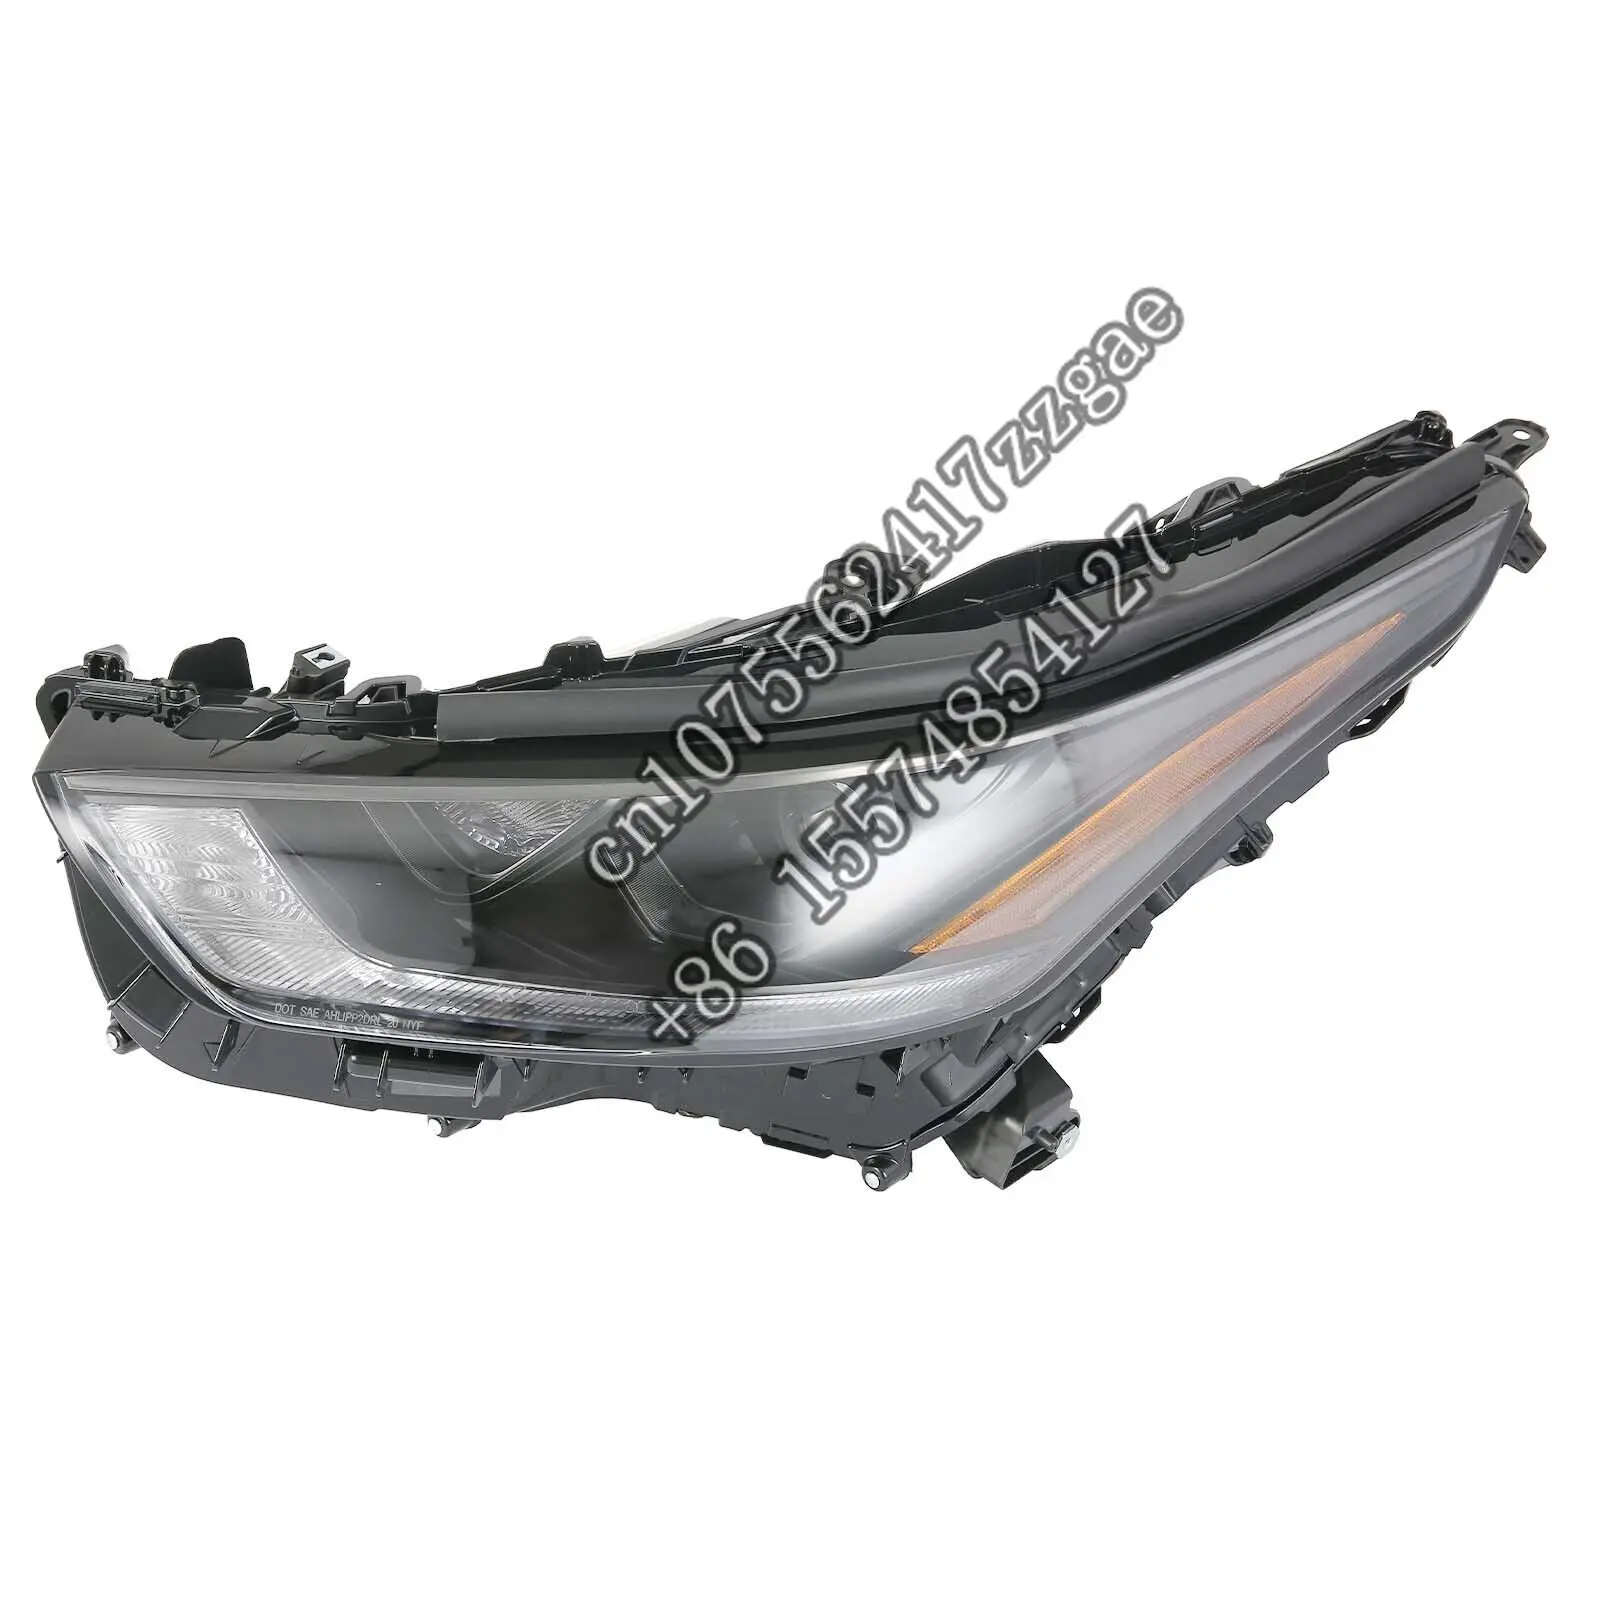 car body usa model front headlight kits headlamp for  HIGHLAND 2020 2021 2022 XSE for buick enclave automotive accessories headlights 2021 2022 2023 led headlight high quality original headlamp assembly auto